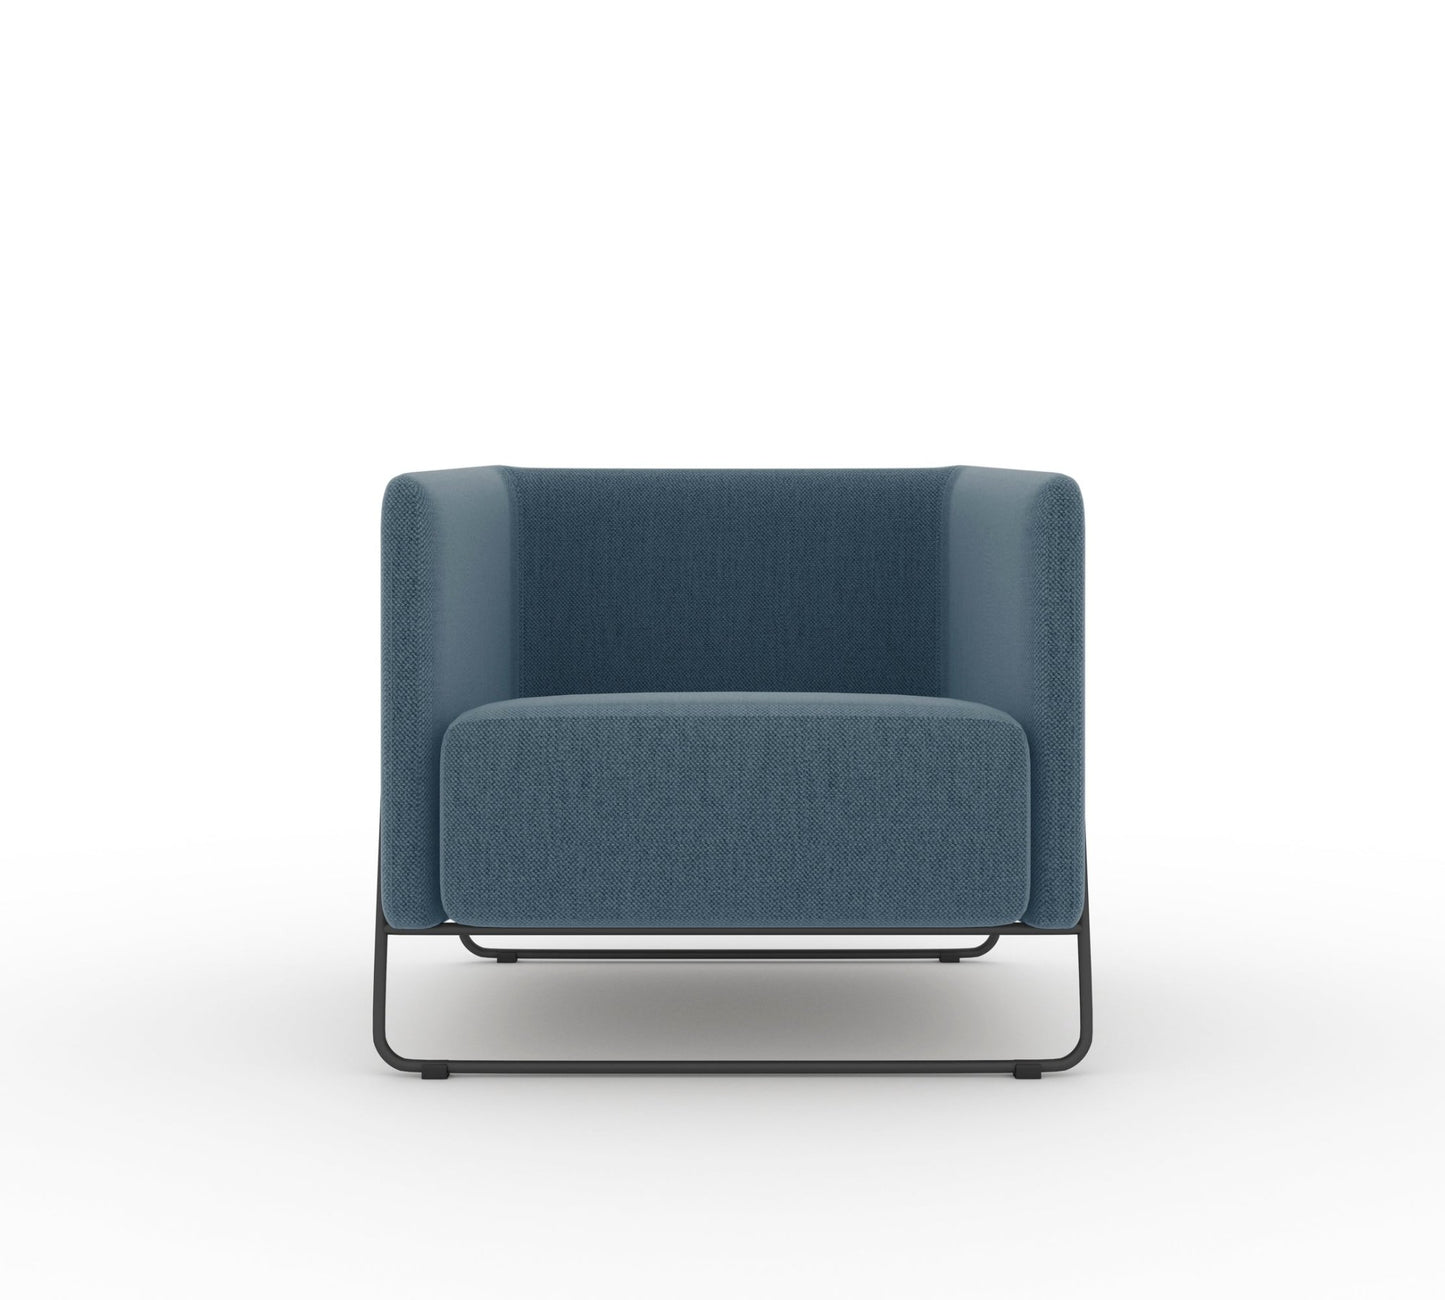 Load image into Gallery viewer, Hanno Lounge Chair by Friant - Wholesale Office Furniture
